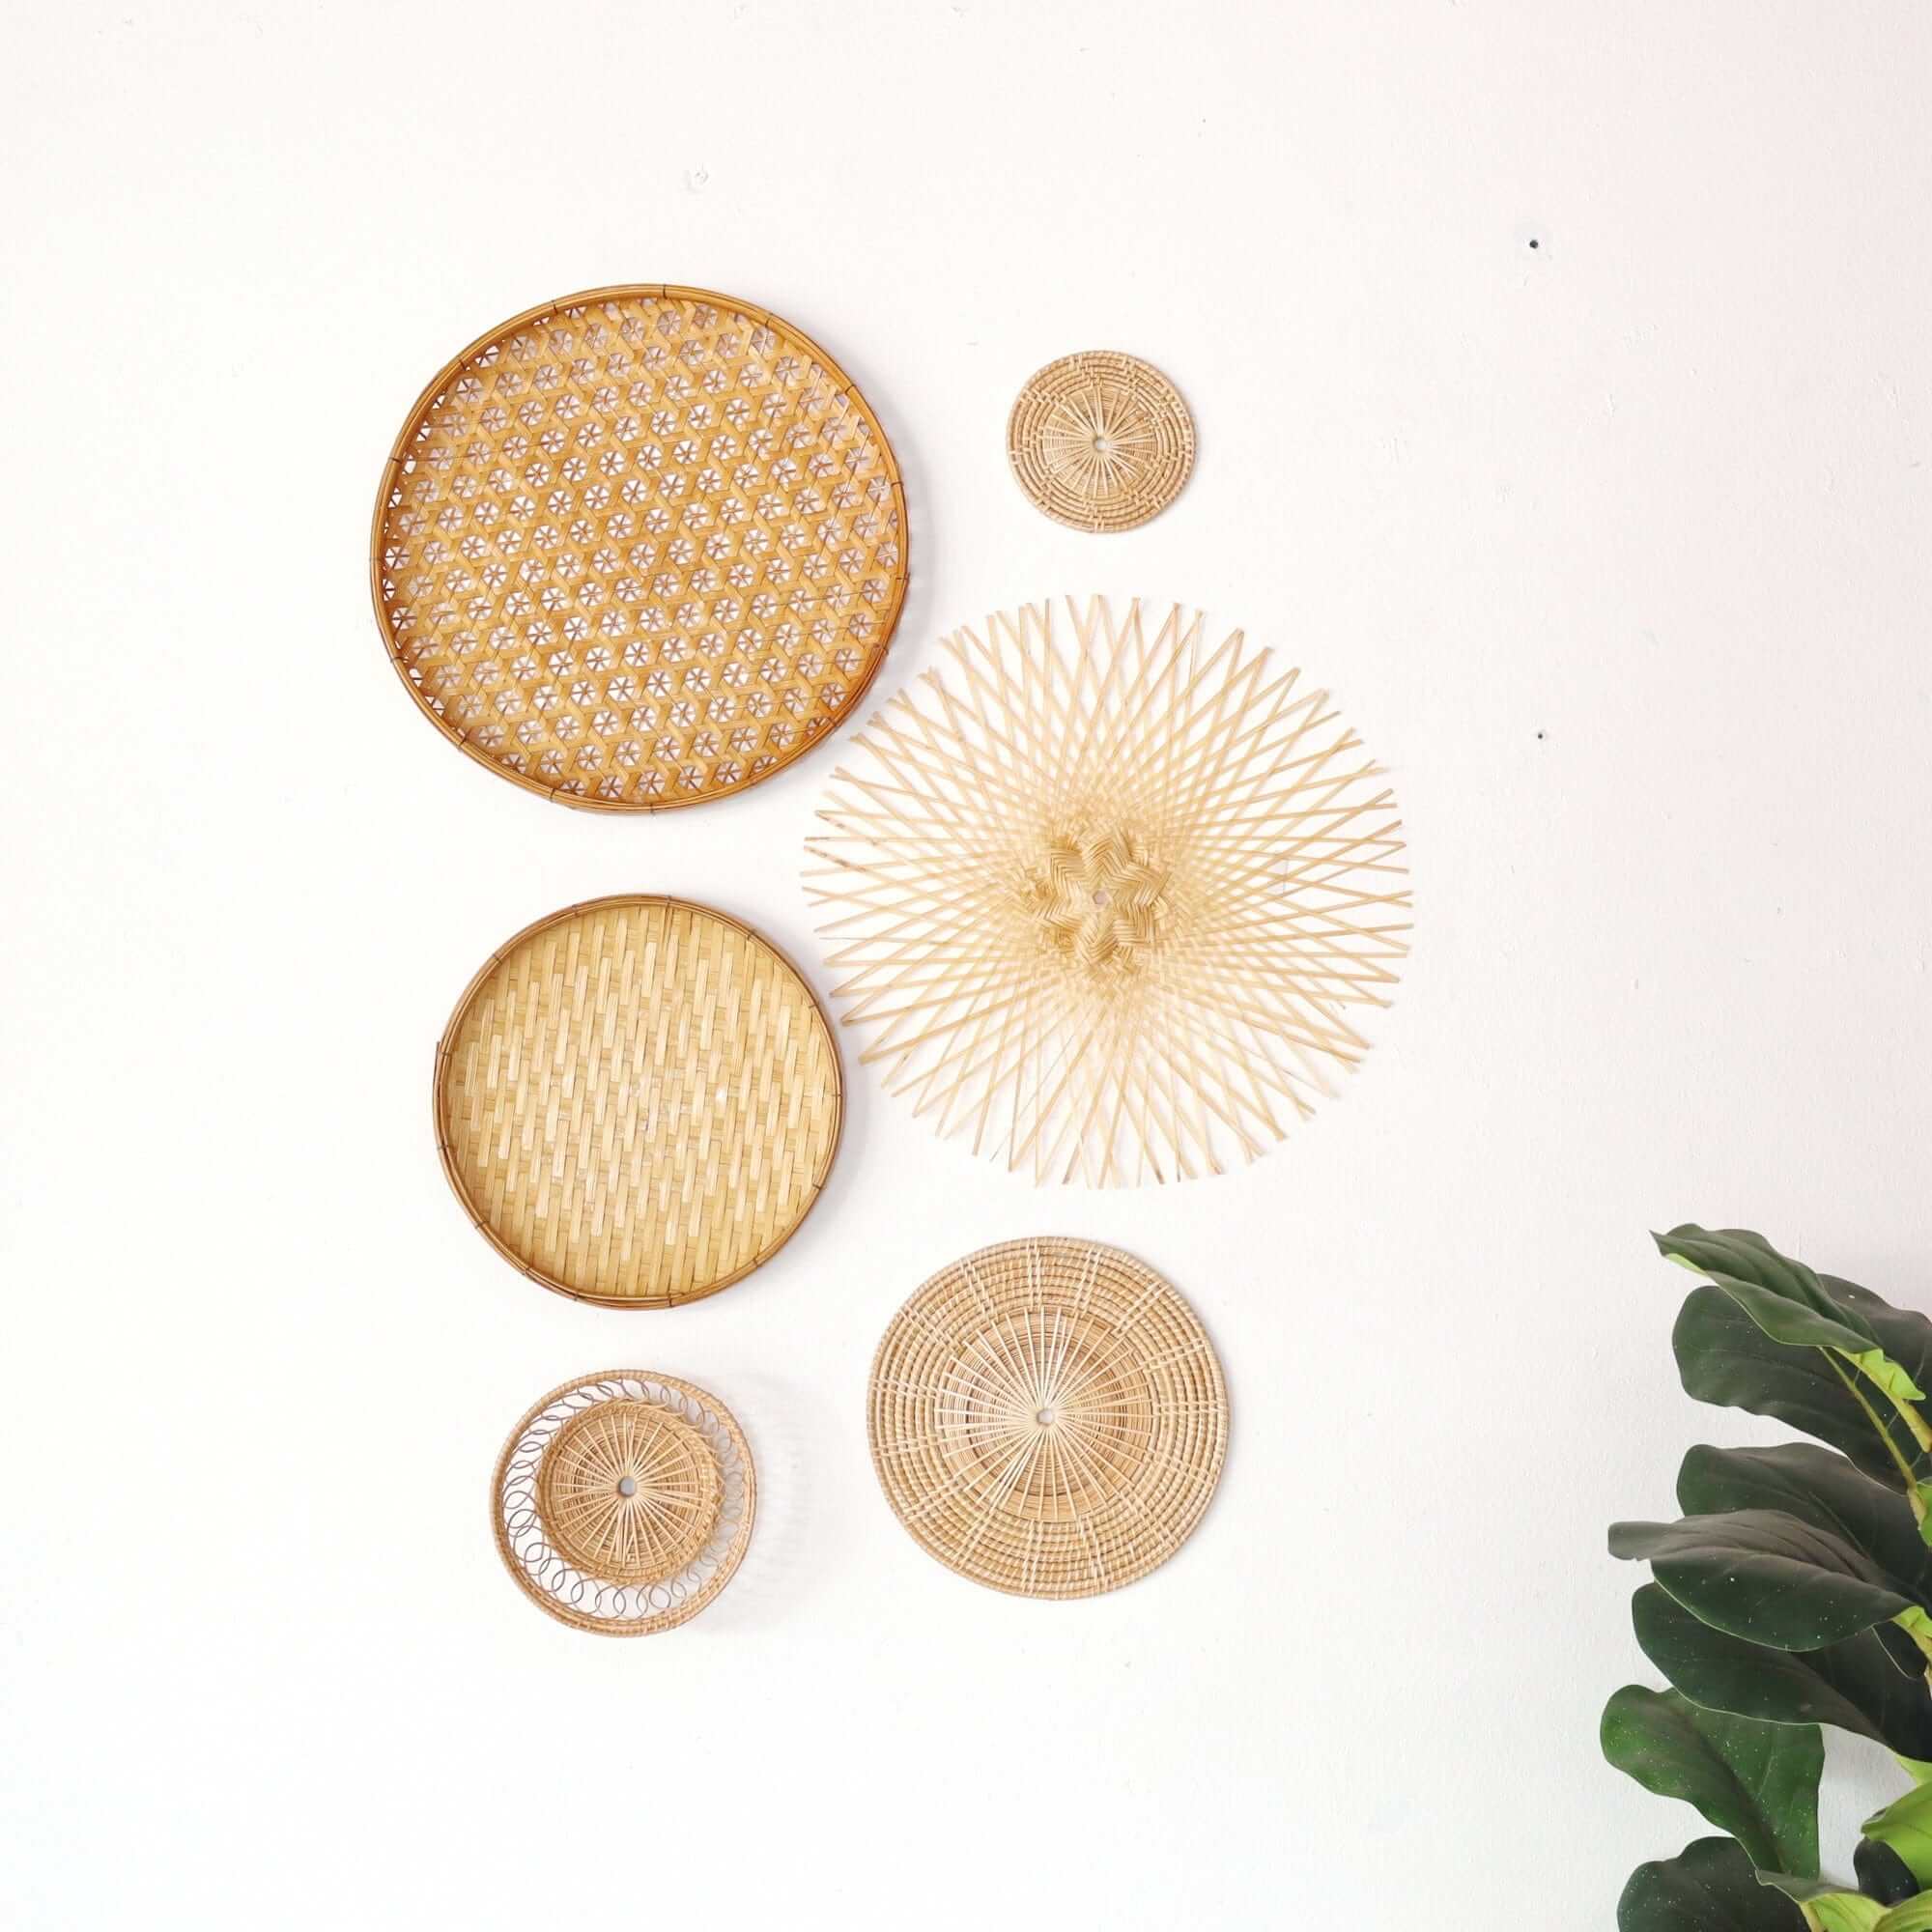 Bamboo and Rattan Wall Hanging Decor Set of 6 - MA DI SON